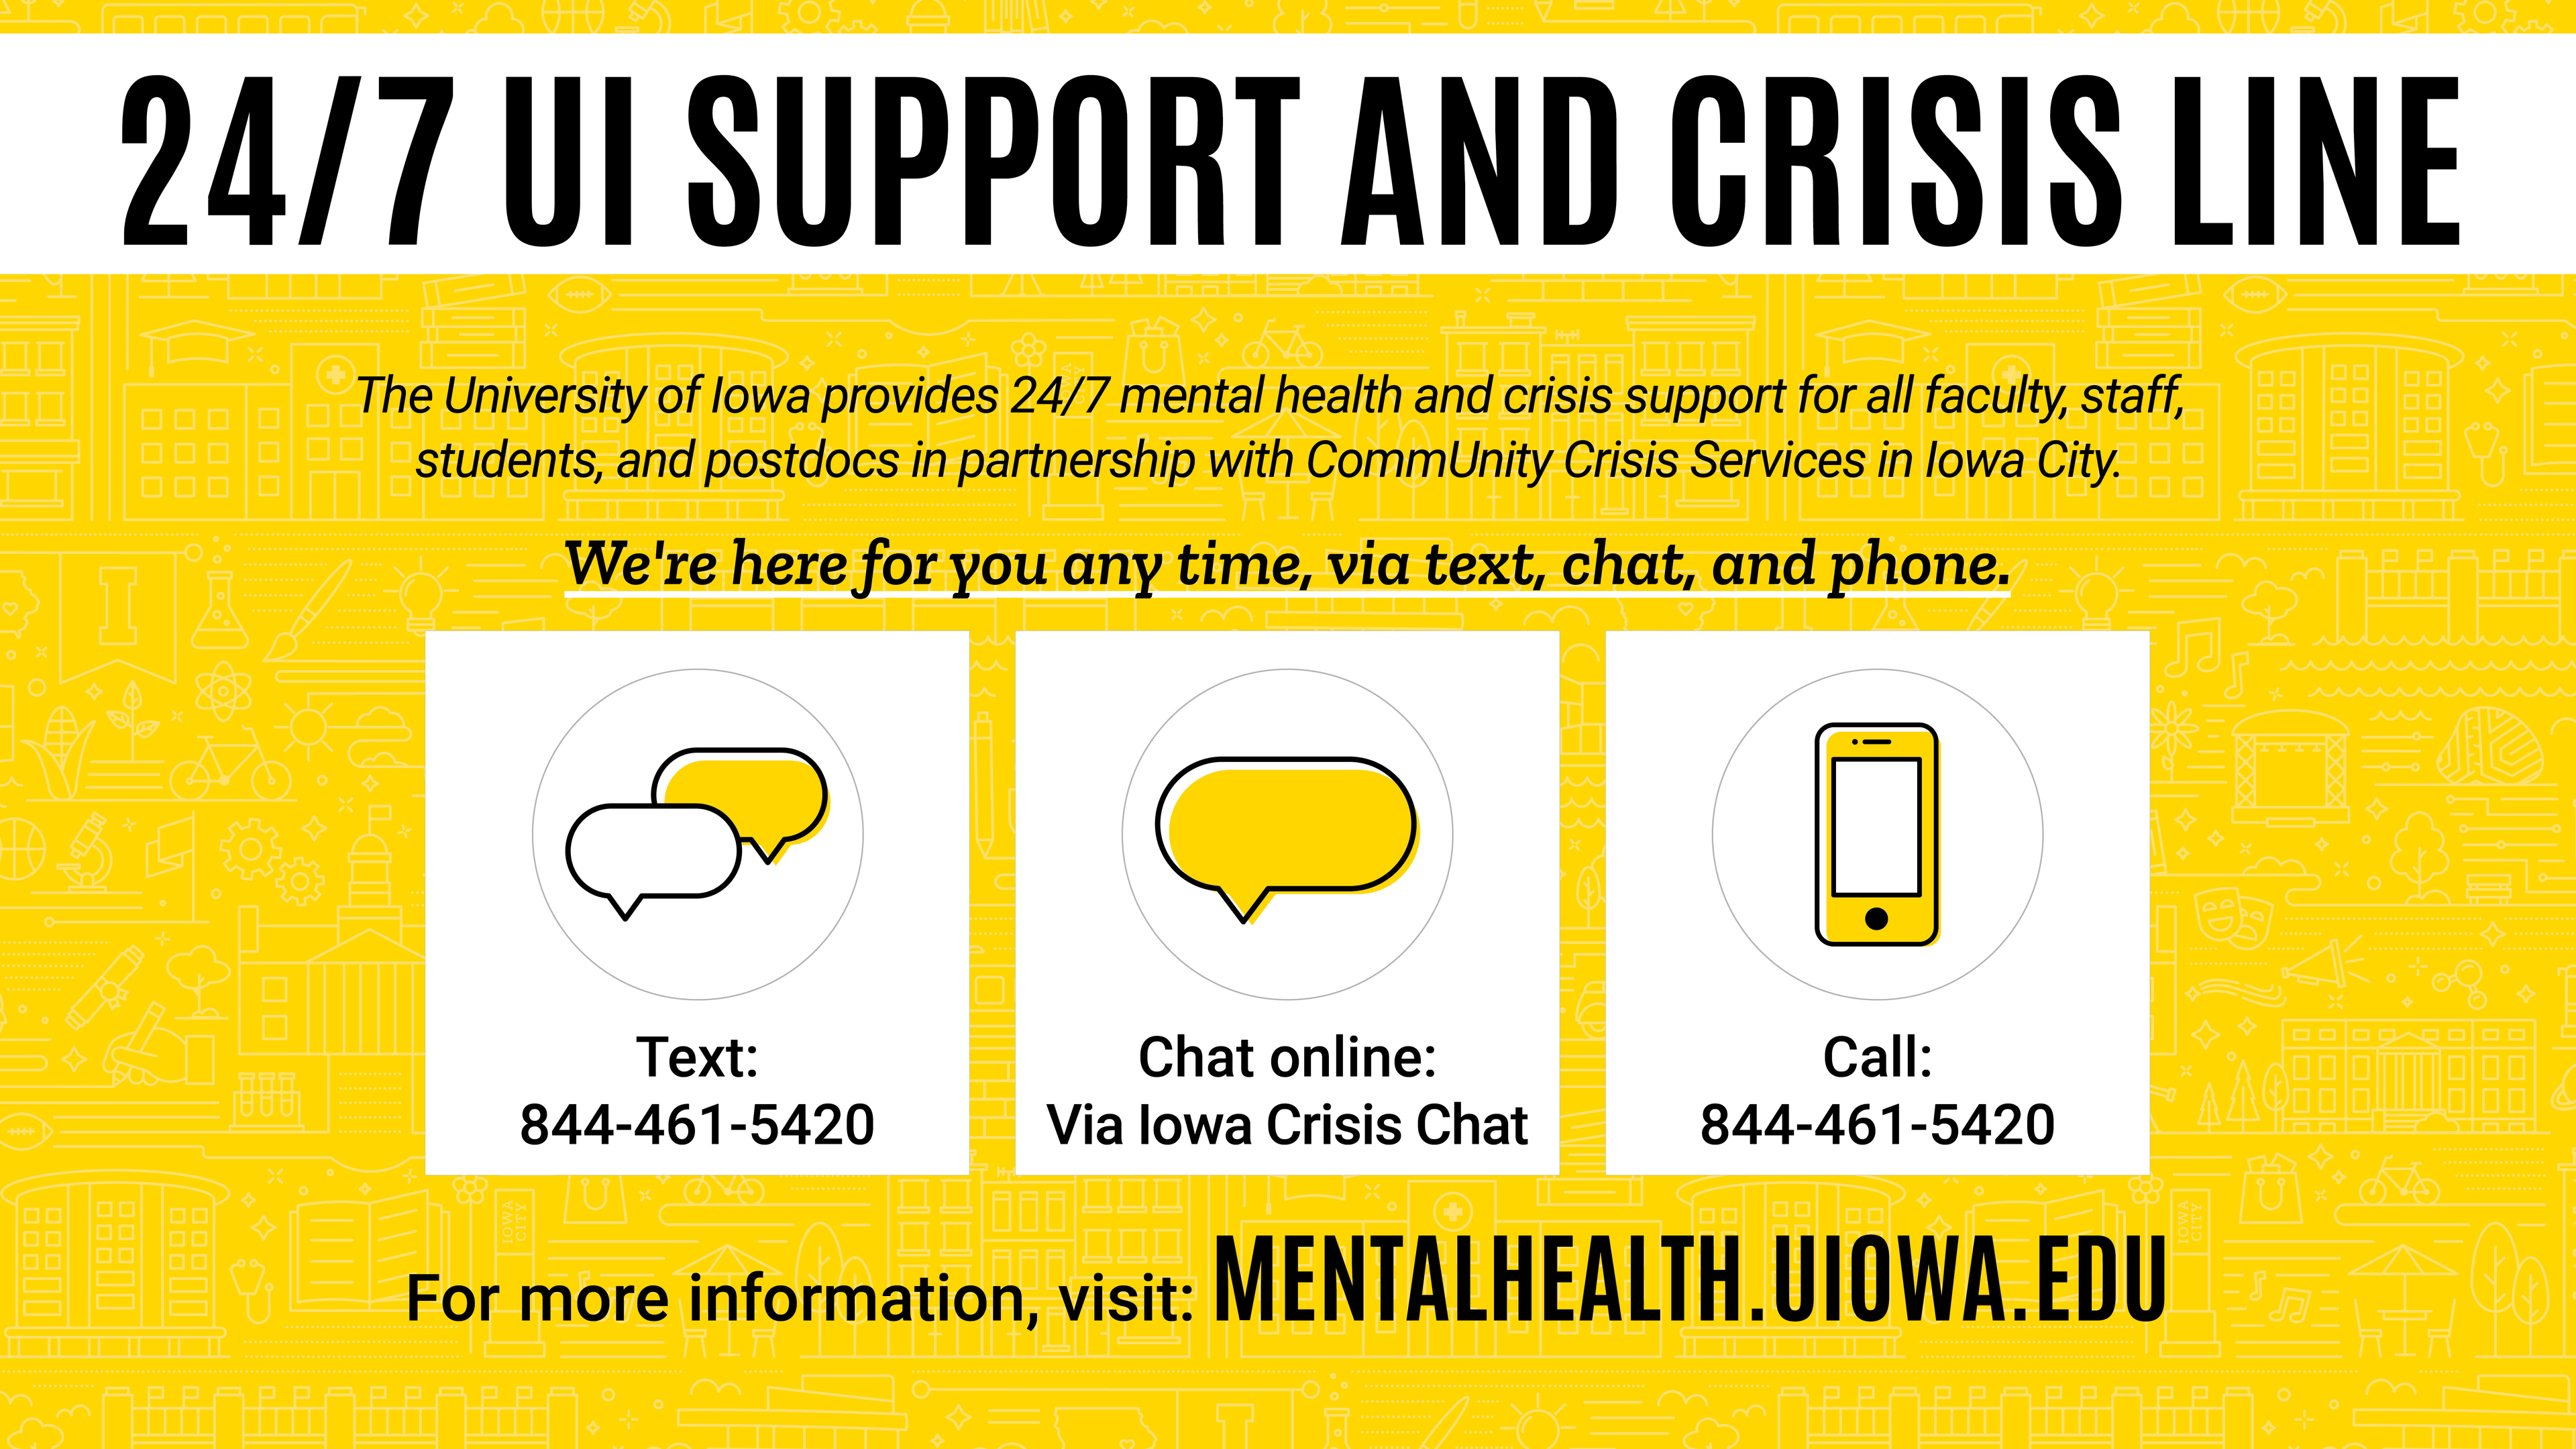 24/7 crisis support line